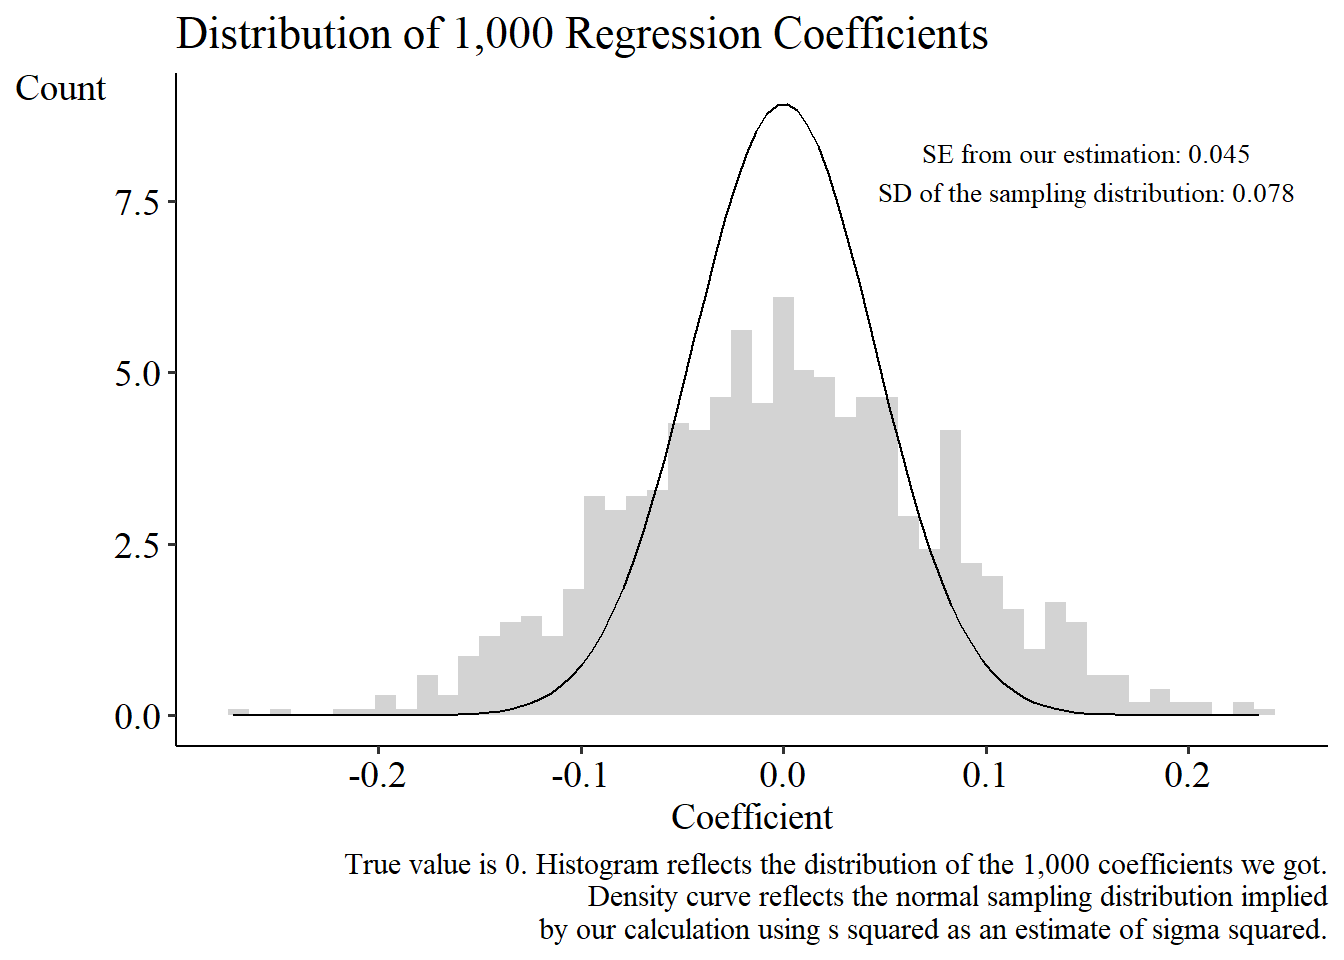 A histogram of 1000 regression coefficients estimated from data where the error term's variance is related to the value of X. The histogram is much wider than hte normal distribution also shown that is estimated using our typical standard-error formula.